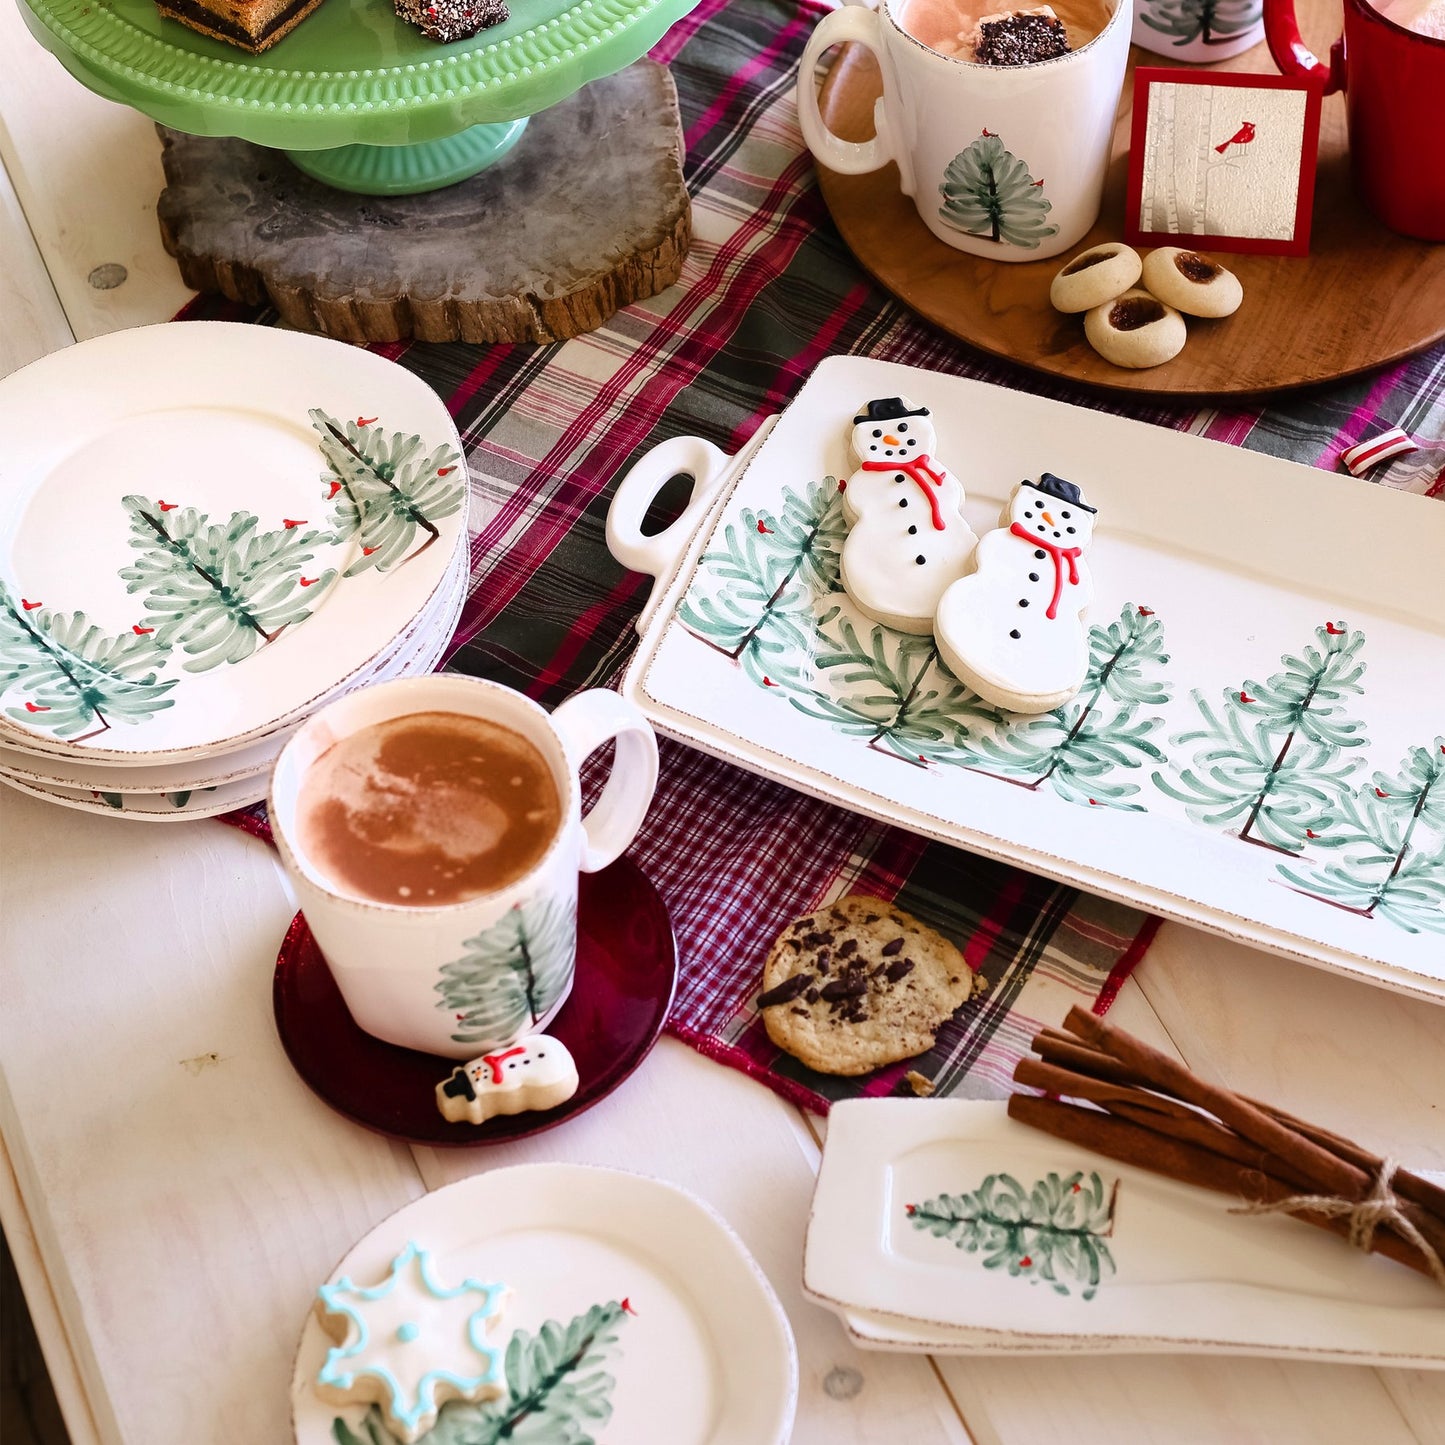 holiday platters, plates, and mugs arranged on a wooden table with snowman cookies, hot cocoa, and cinnamon sticks.